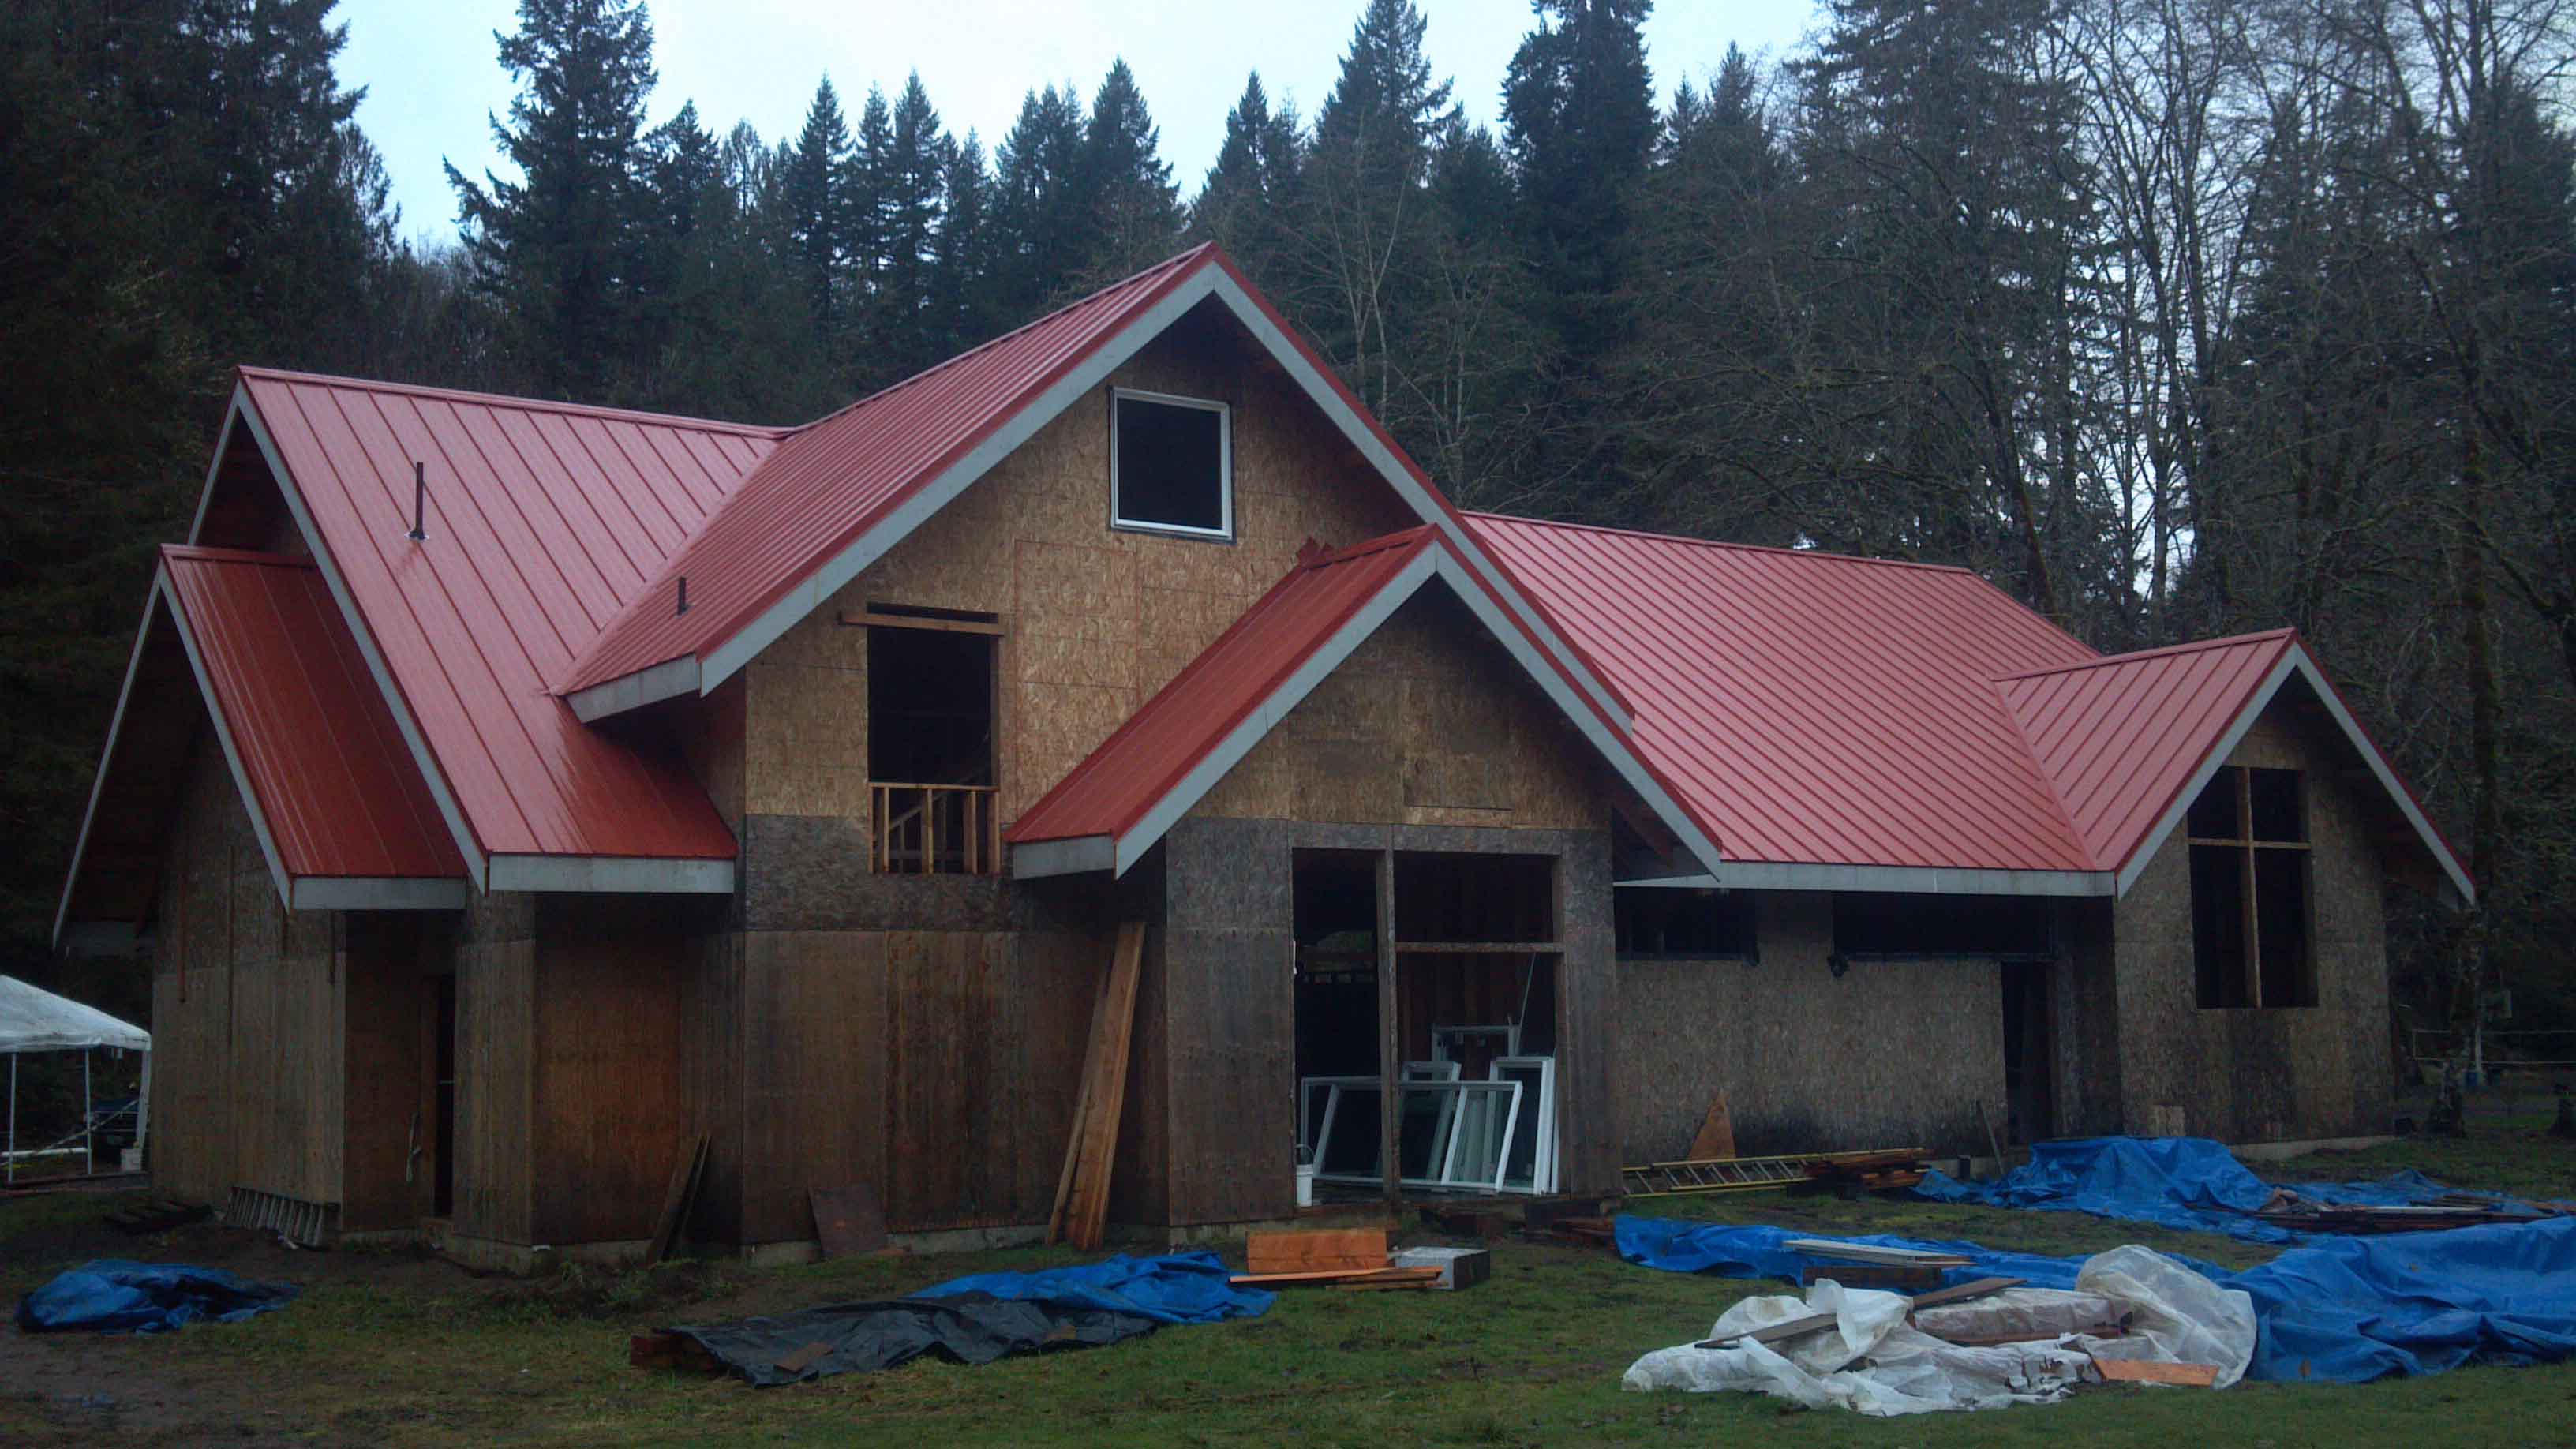 Comercial metal roof at Eagle Fern Camp